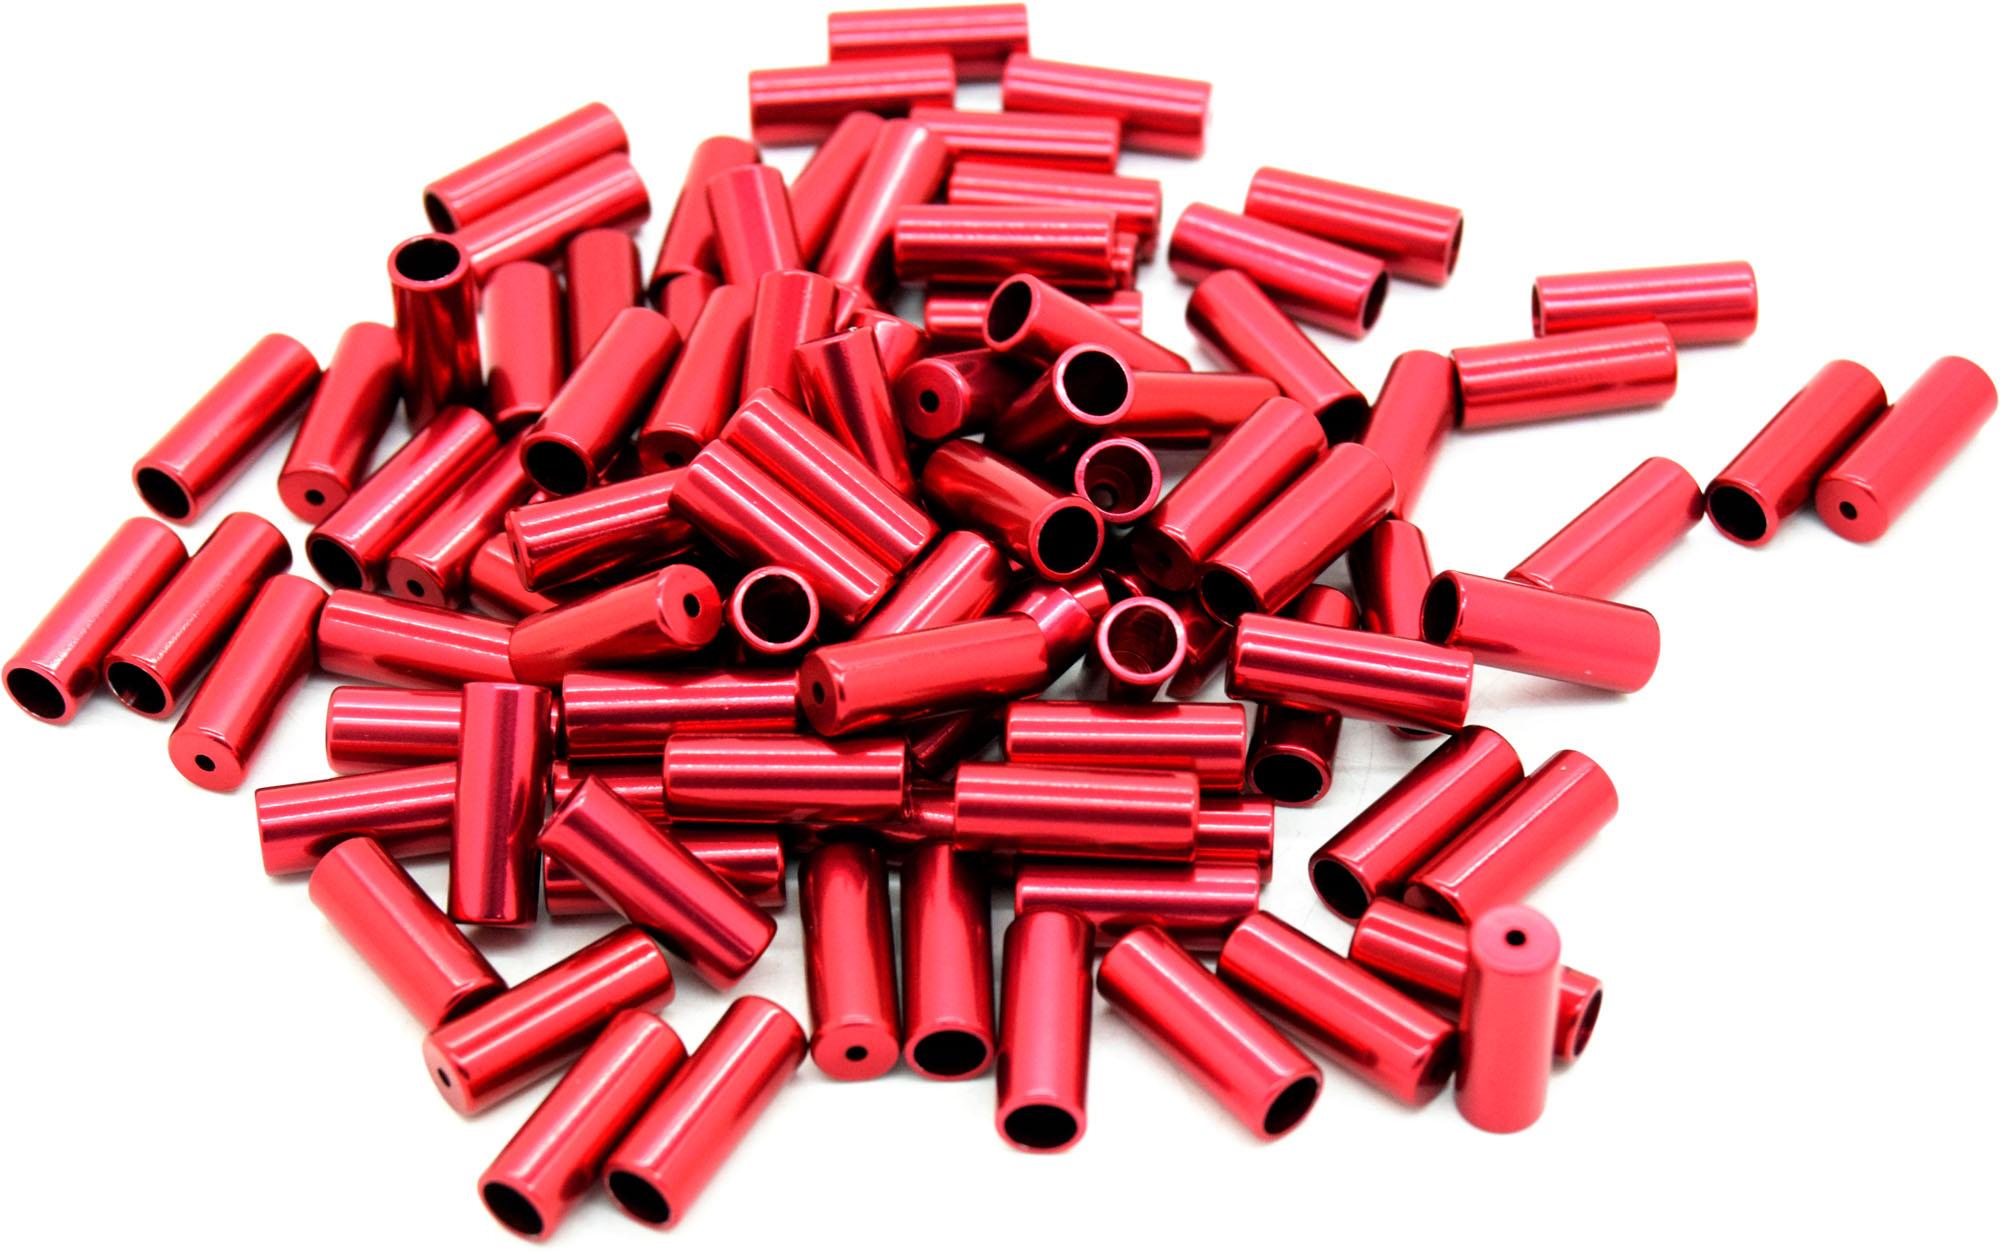 Transfil Brake Cable Casing Caps 5mm (trade Pack)  Red